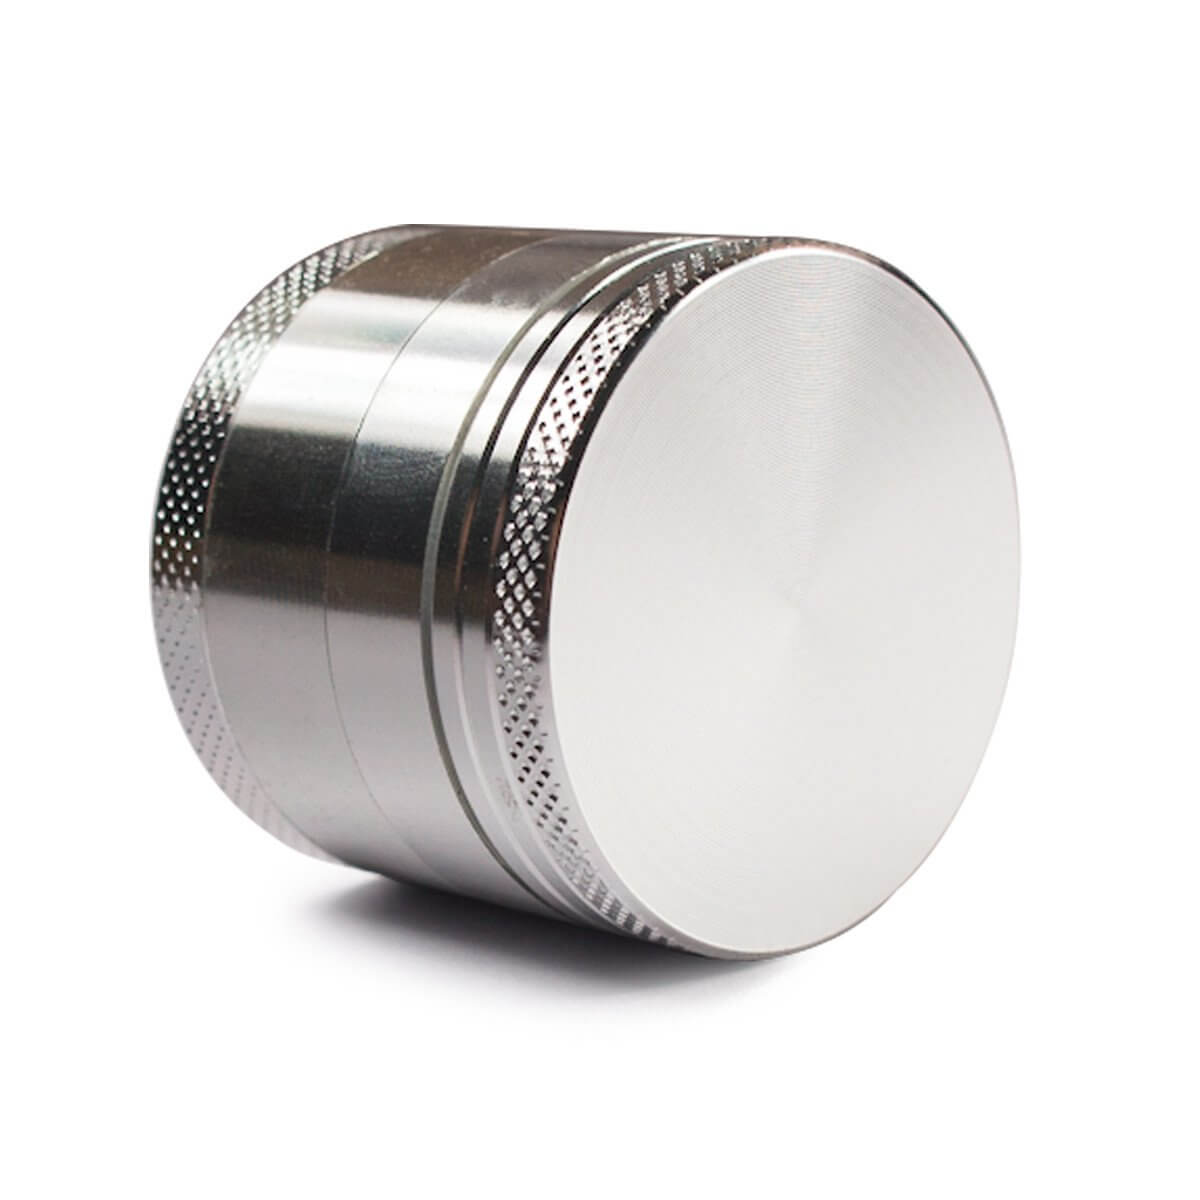 Small Aluminum Dry Herb Grinder For Sale, Puri5